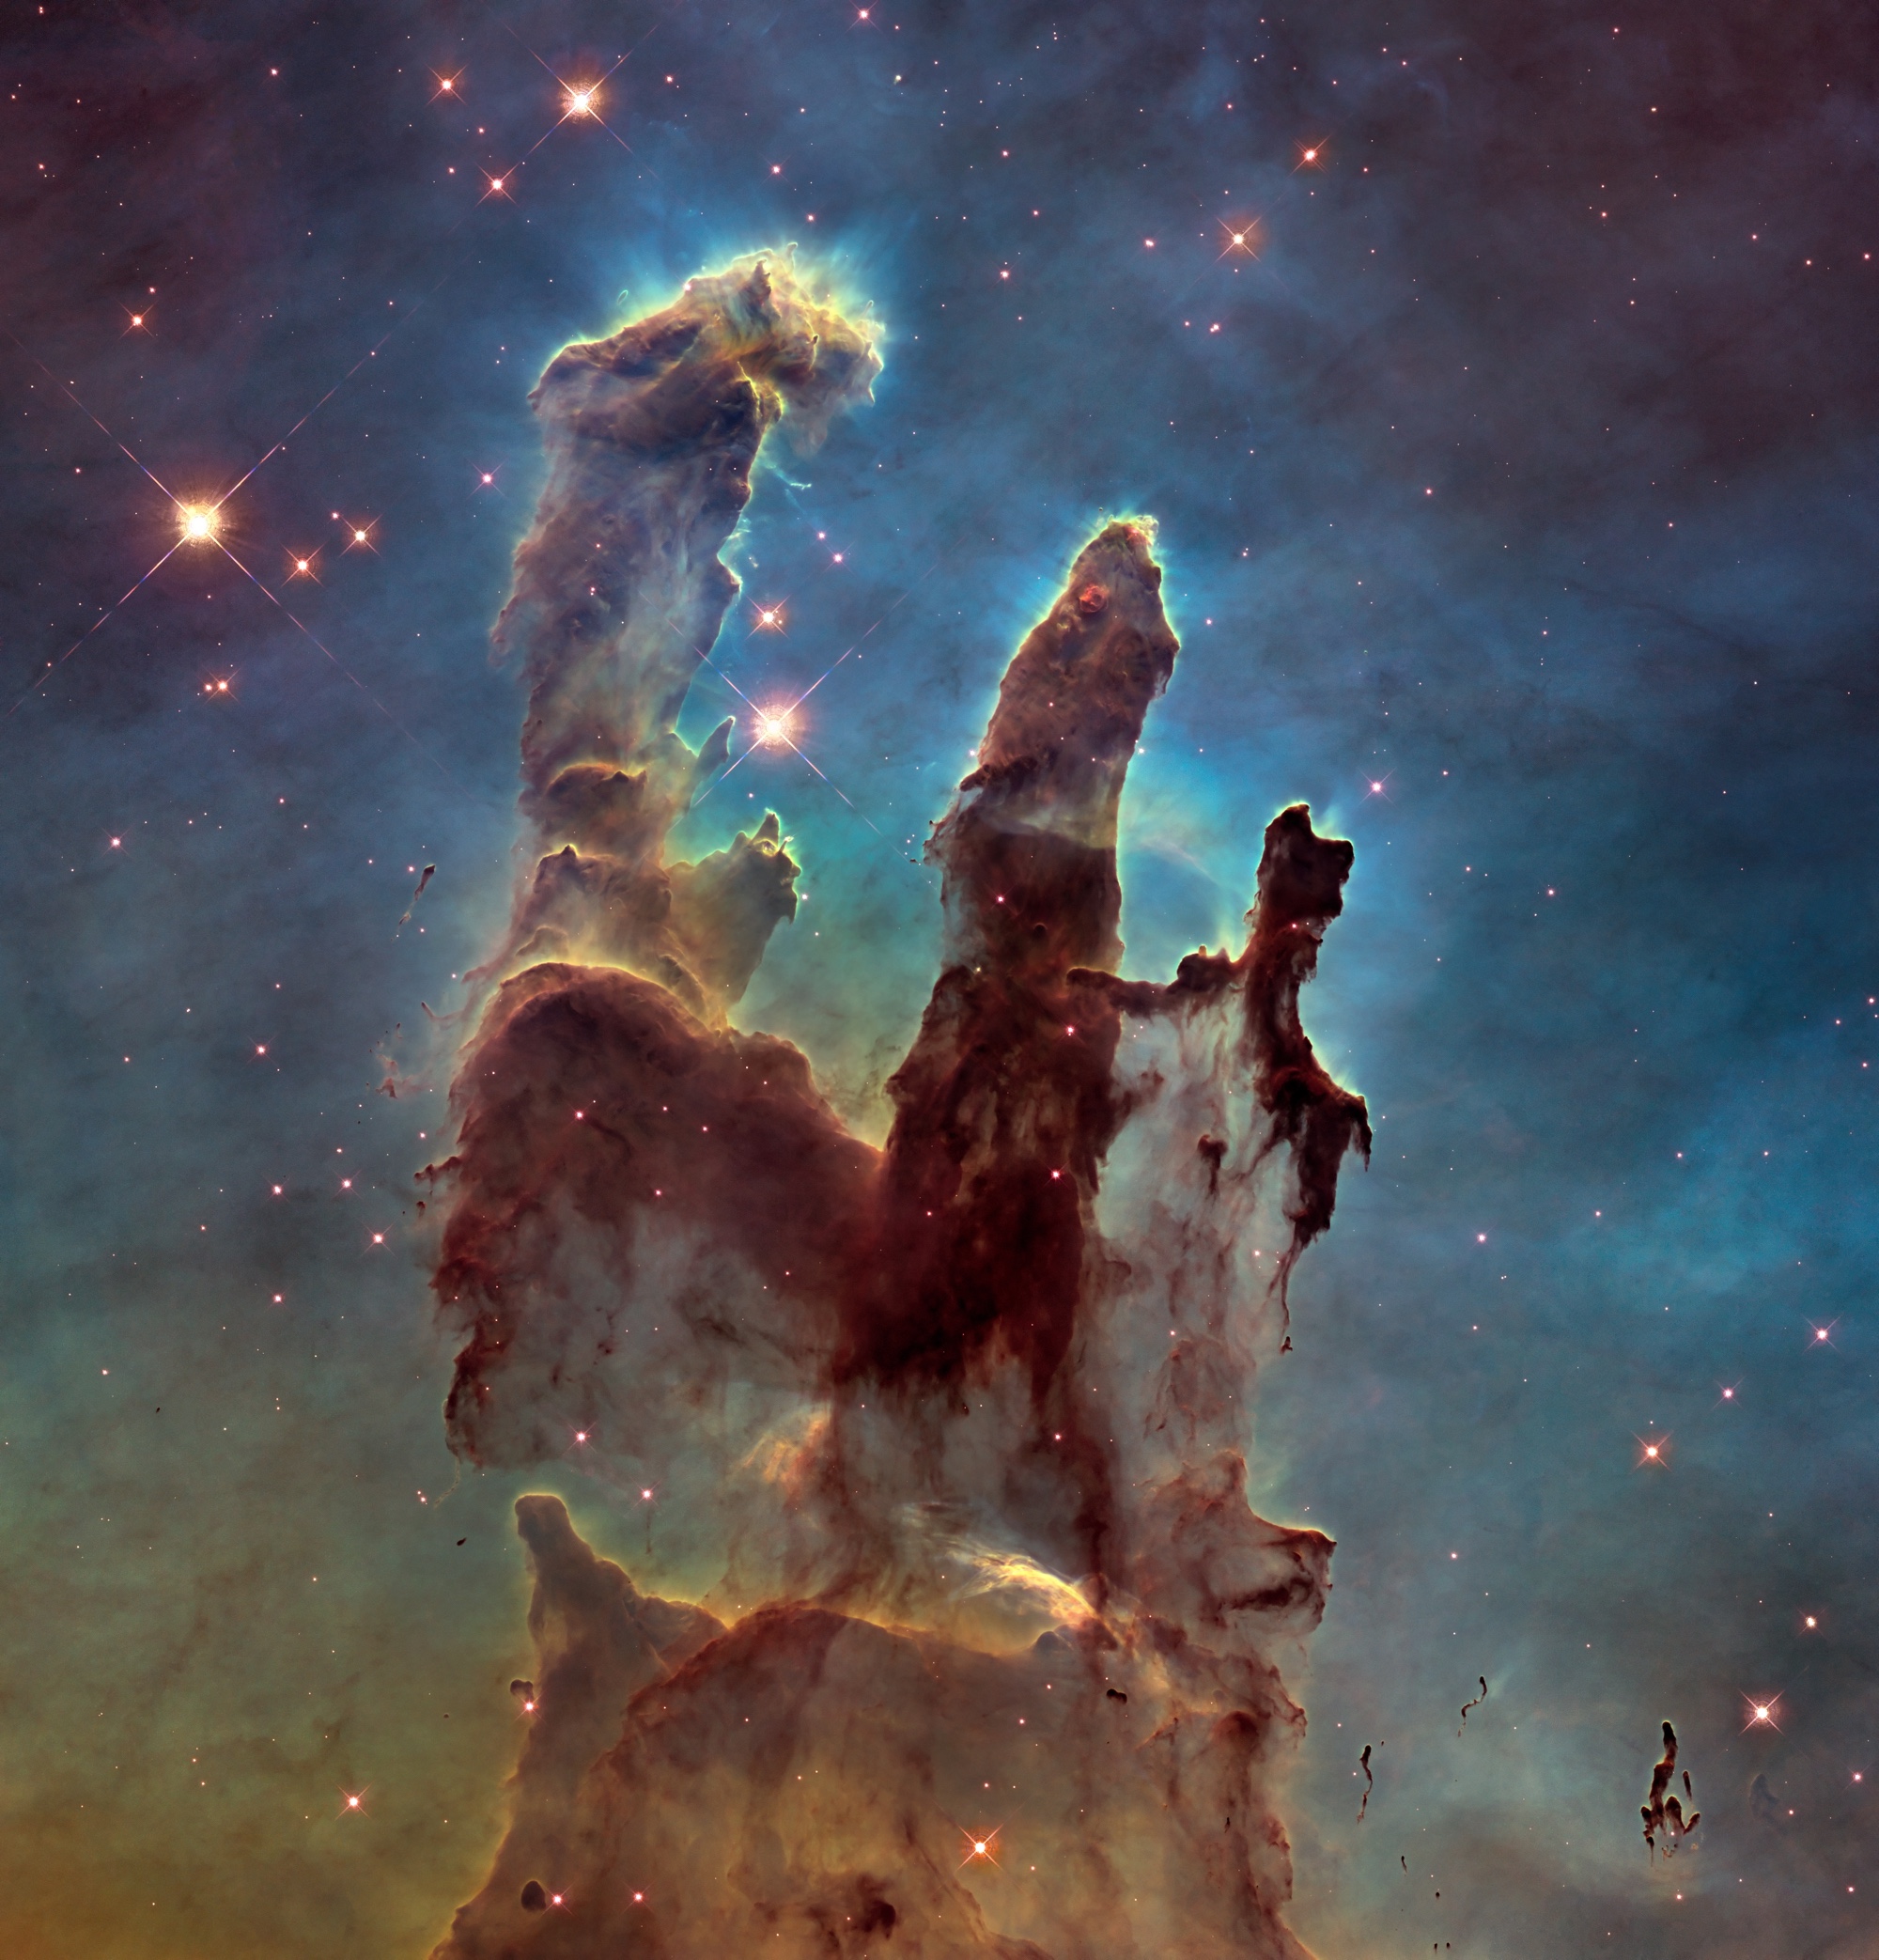 Pillars of Creation, the most famous picture taken by the Hubble Space Telescope